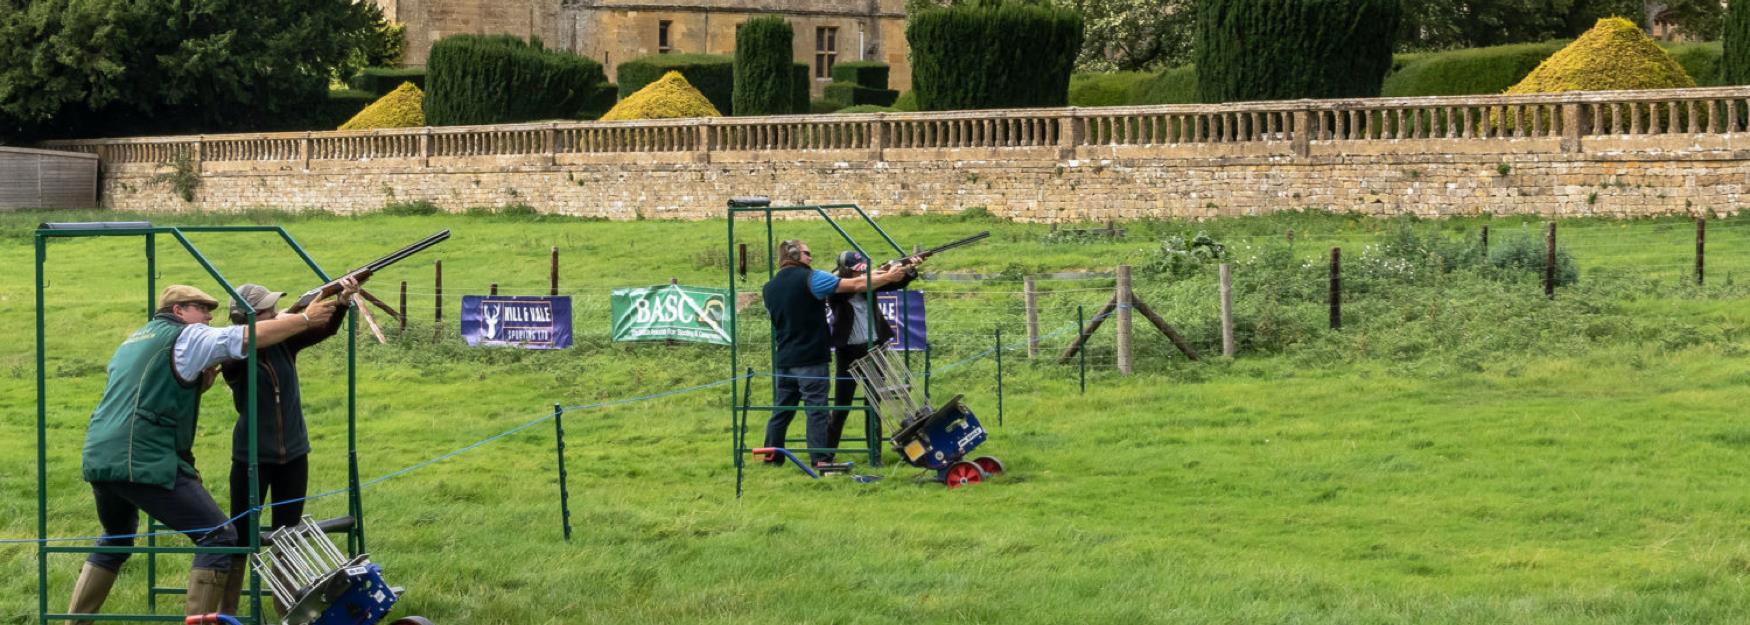 Clay Pigeon Shooting at Sudeley Castle